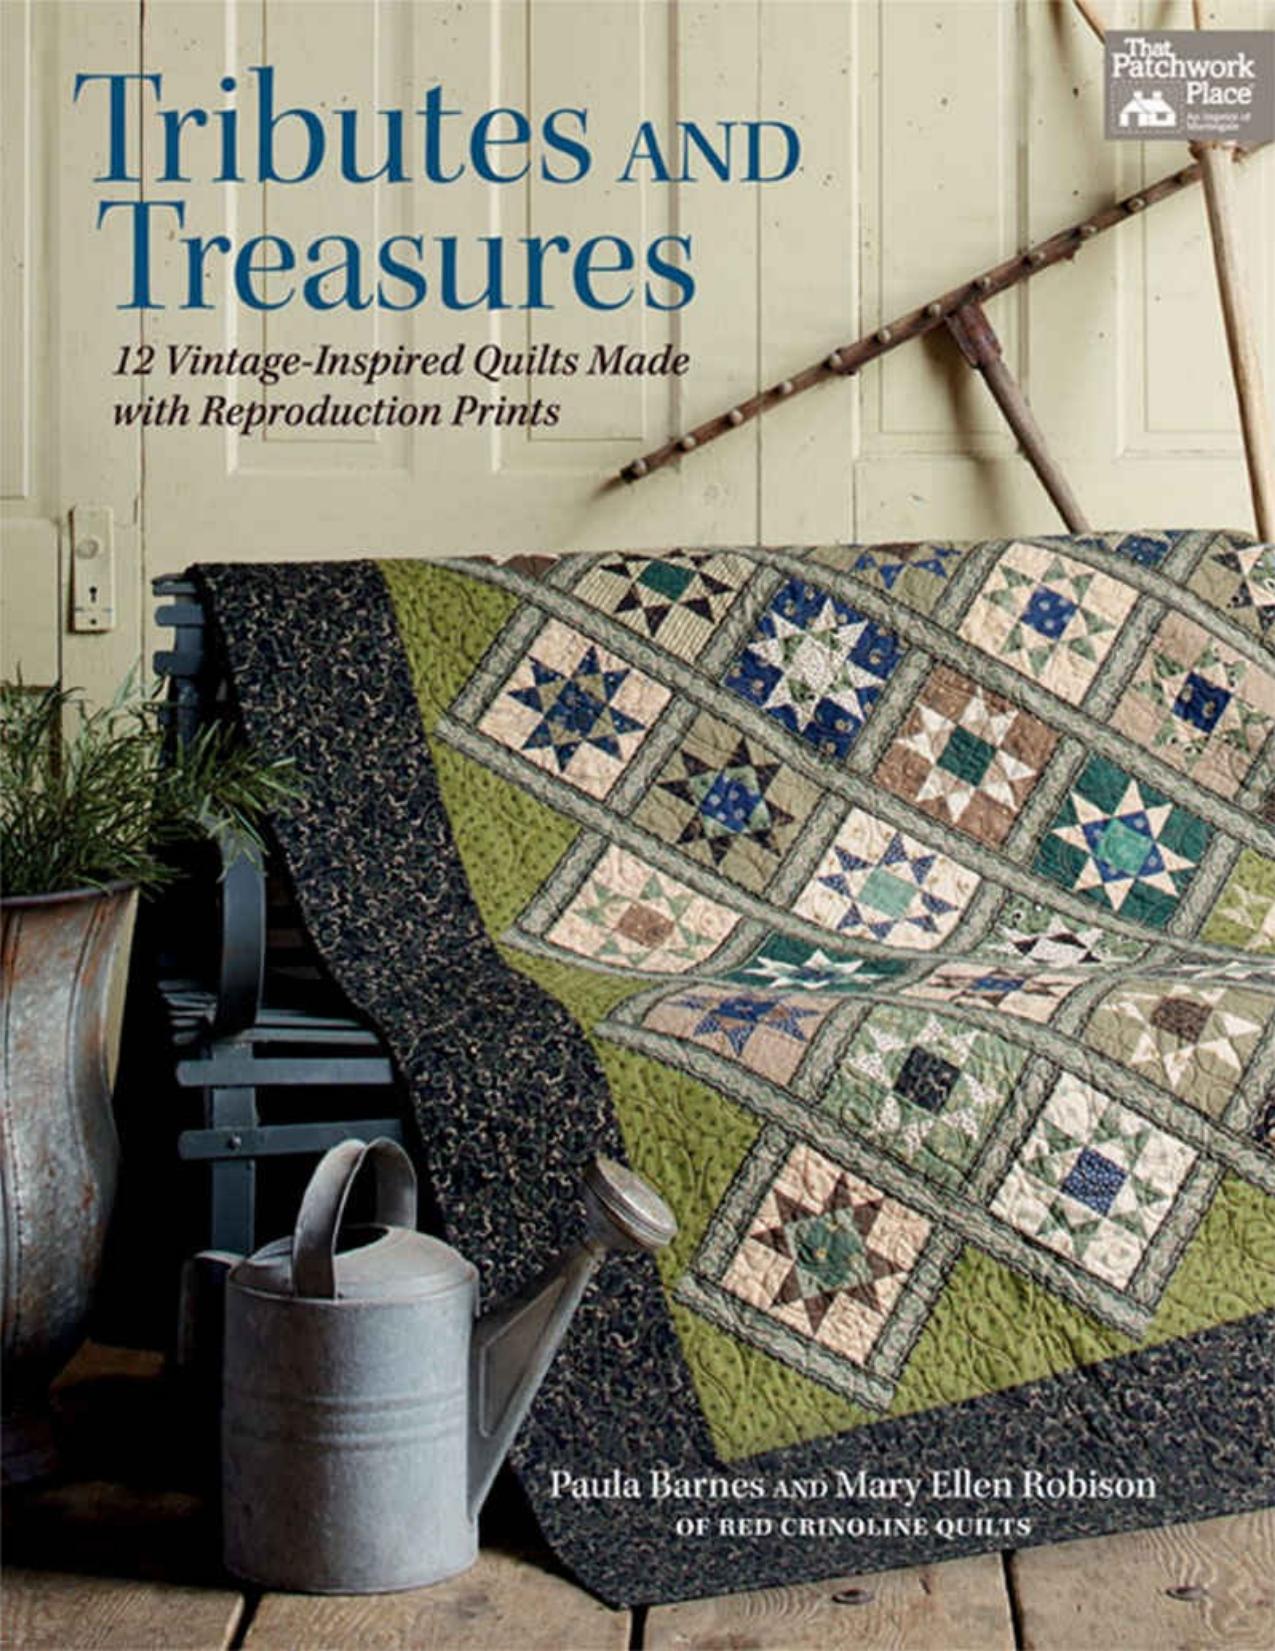 Tributes and Treasures: 12 Vintage-Inspired Quilts Made With Reproduction Prints by Paula Barnes & Mary Ellen Robison